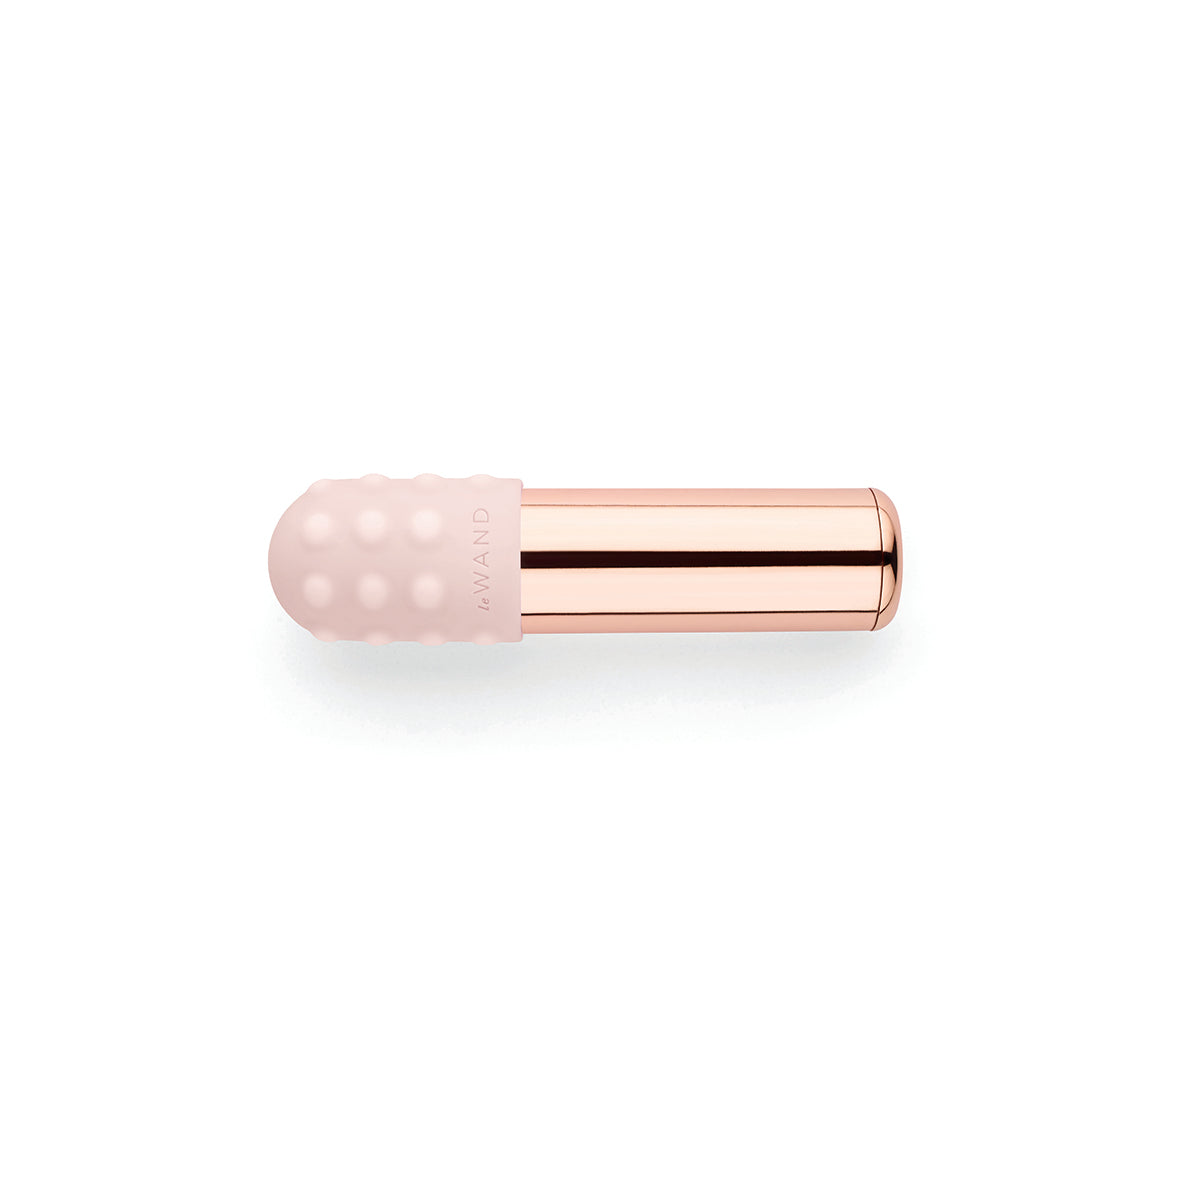 Le Wand Chrome Bullet - Rose Gold Intimates Adult Boutique